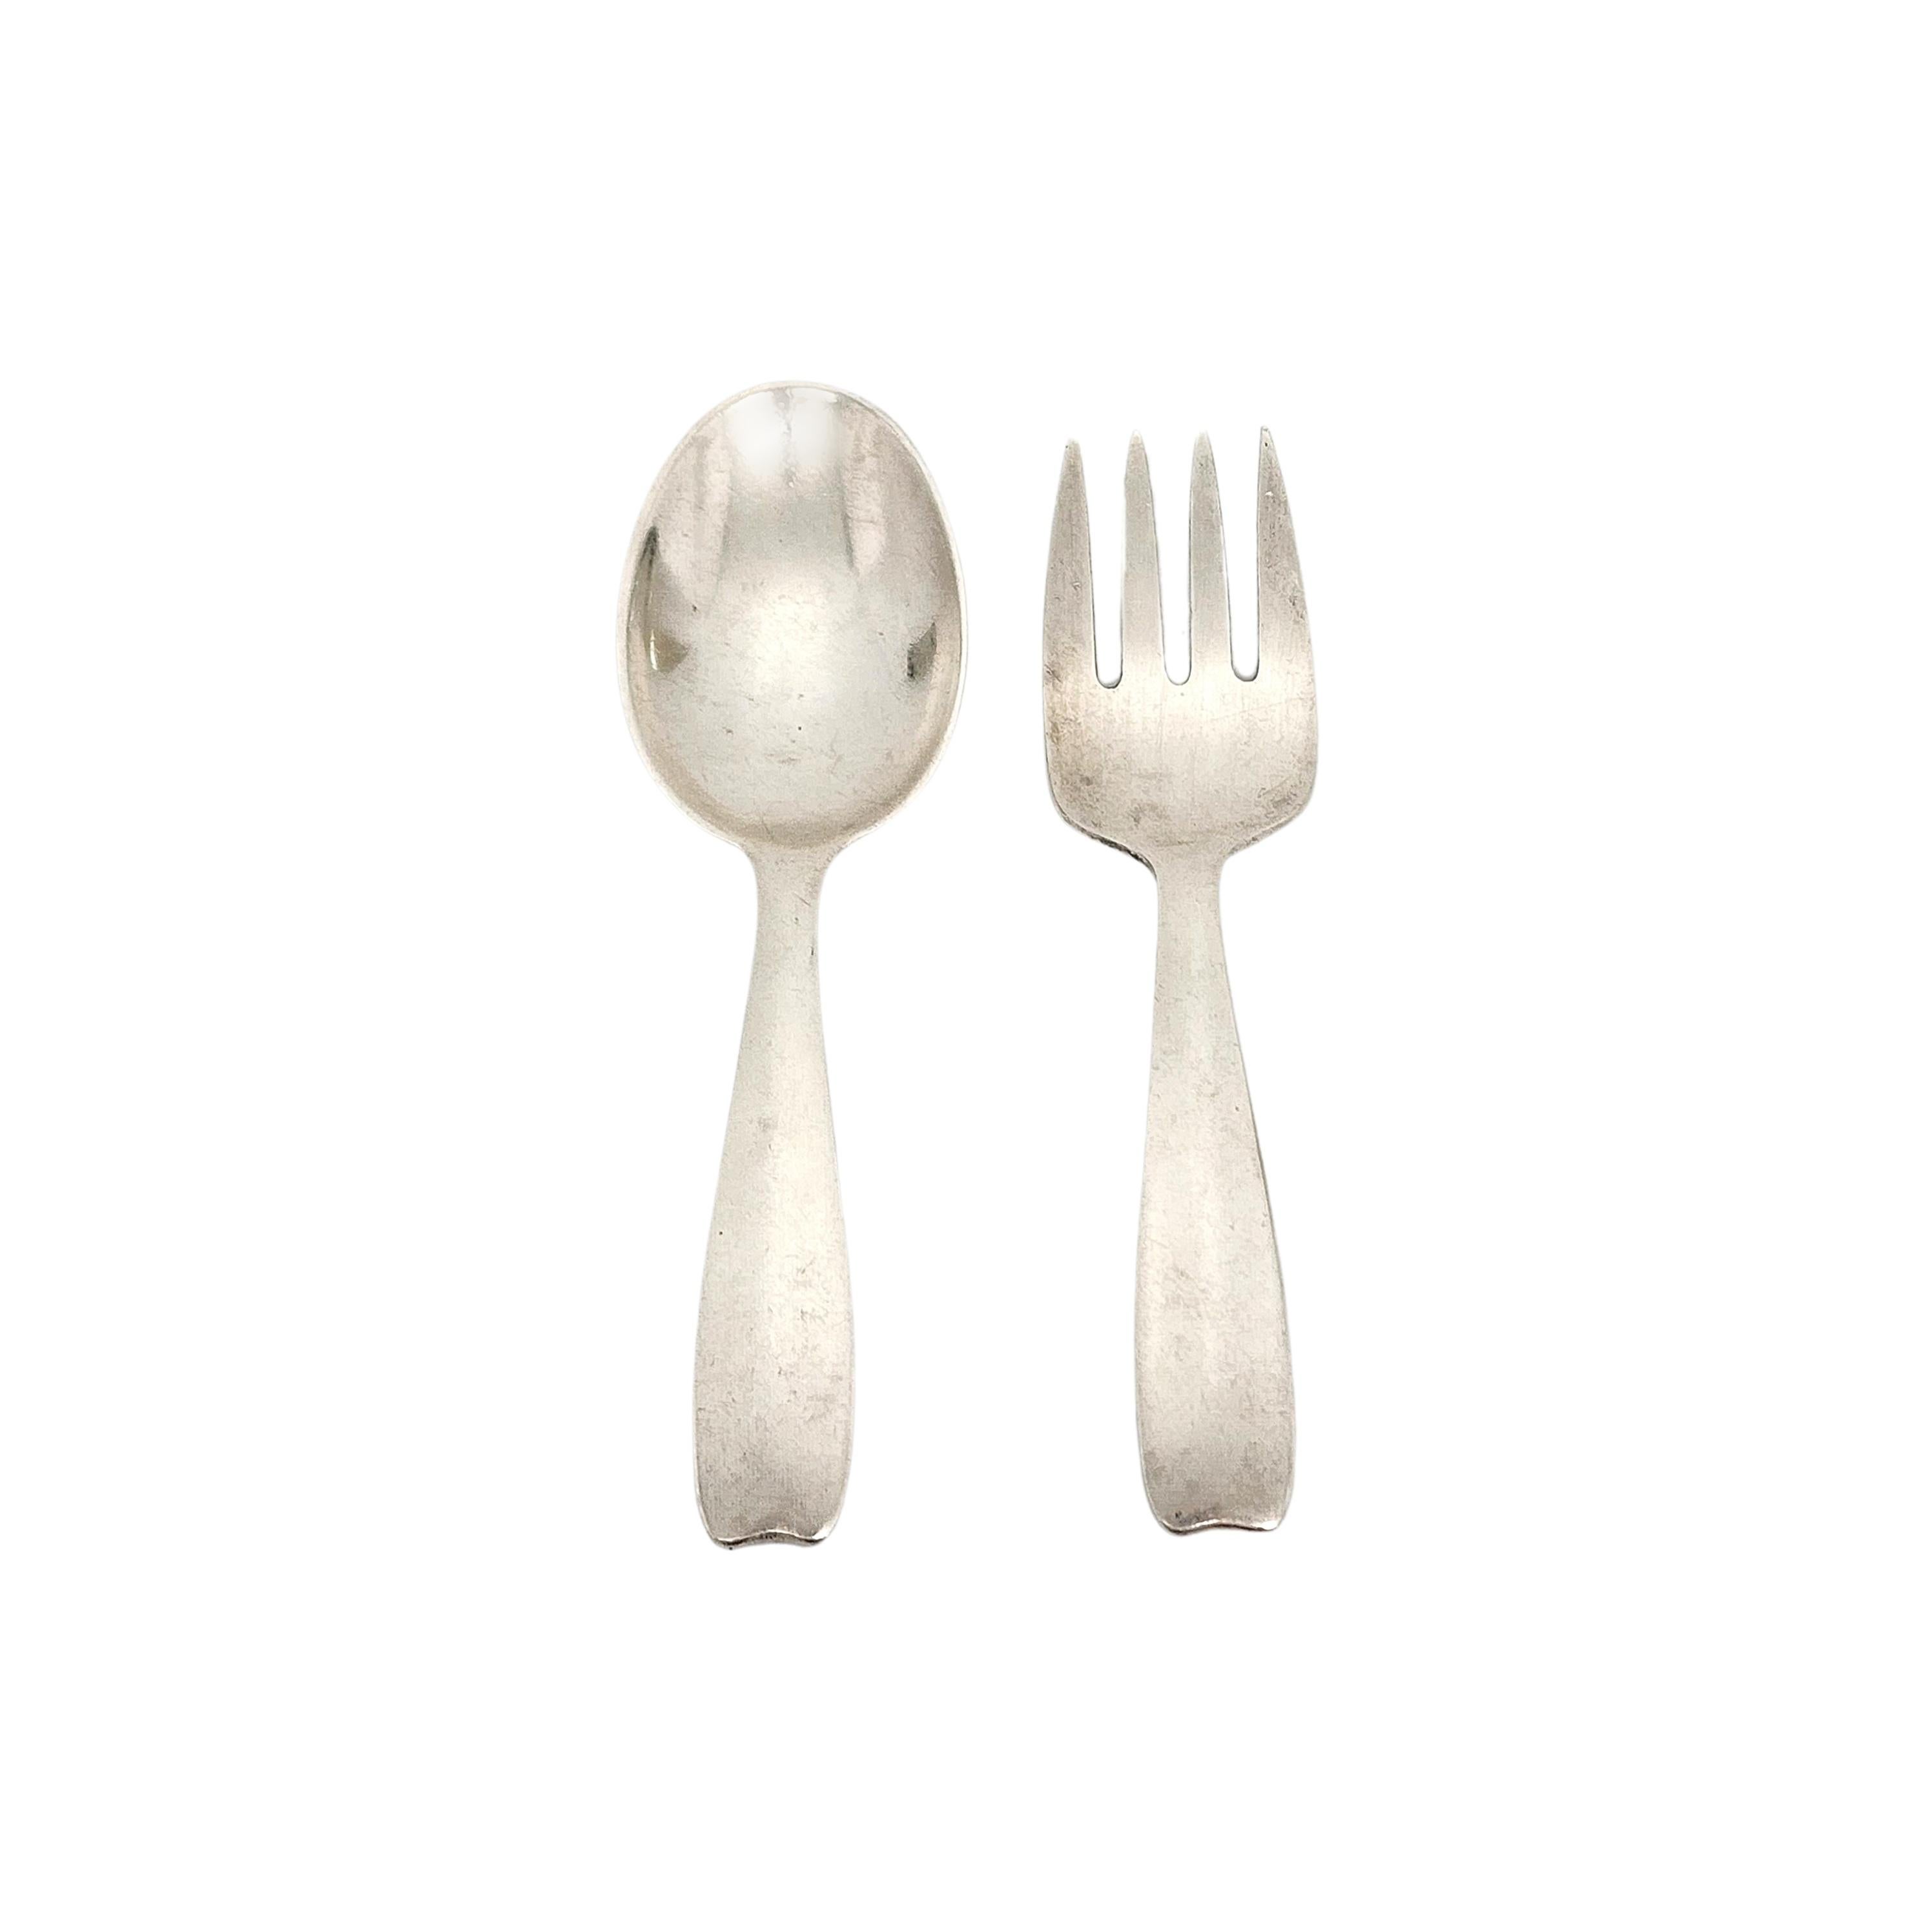 Set of Tiffany & Co sterling silver child/baby infant feeding spoon and fork in the Cordis pattern.

Cordis is a simple and classic design. No monogram or engraving. The M mark dates this piece to manufacture under the directorship of John C. Moore,